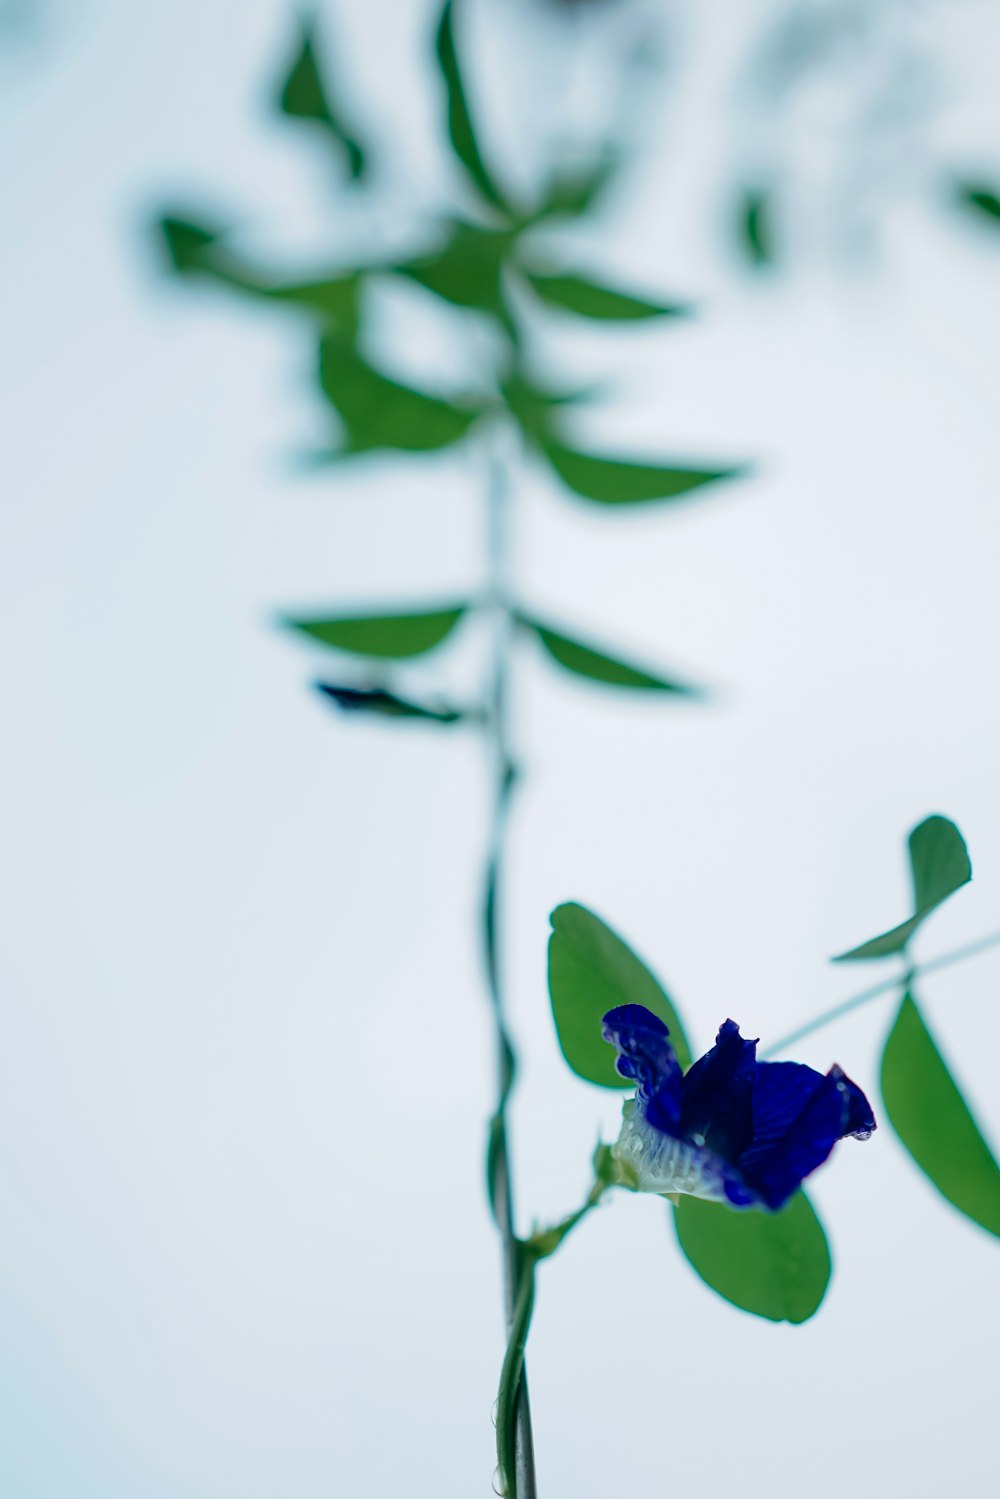 a blue flower with green leaves on a white background